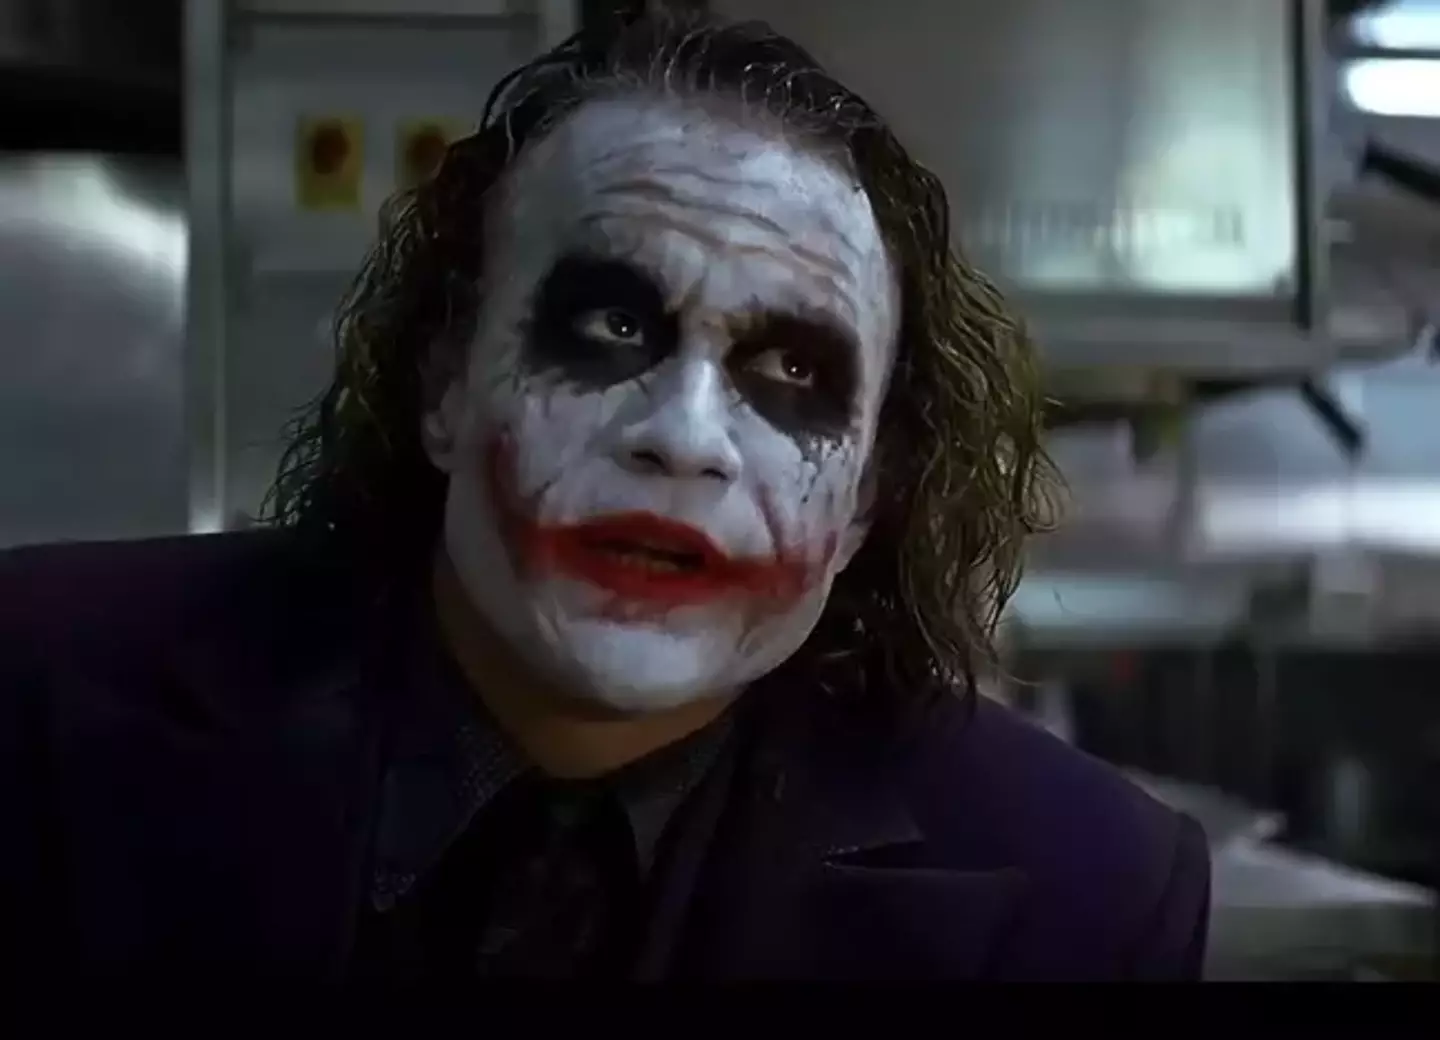 Heath Ledger immersed himself in the role of the Joker.